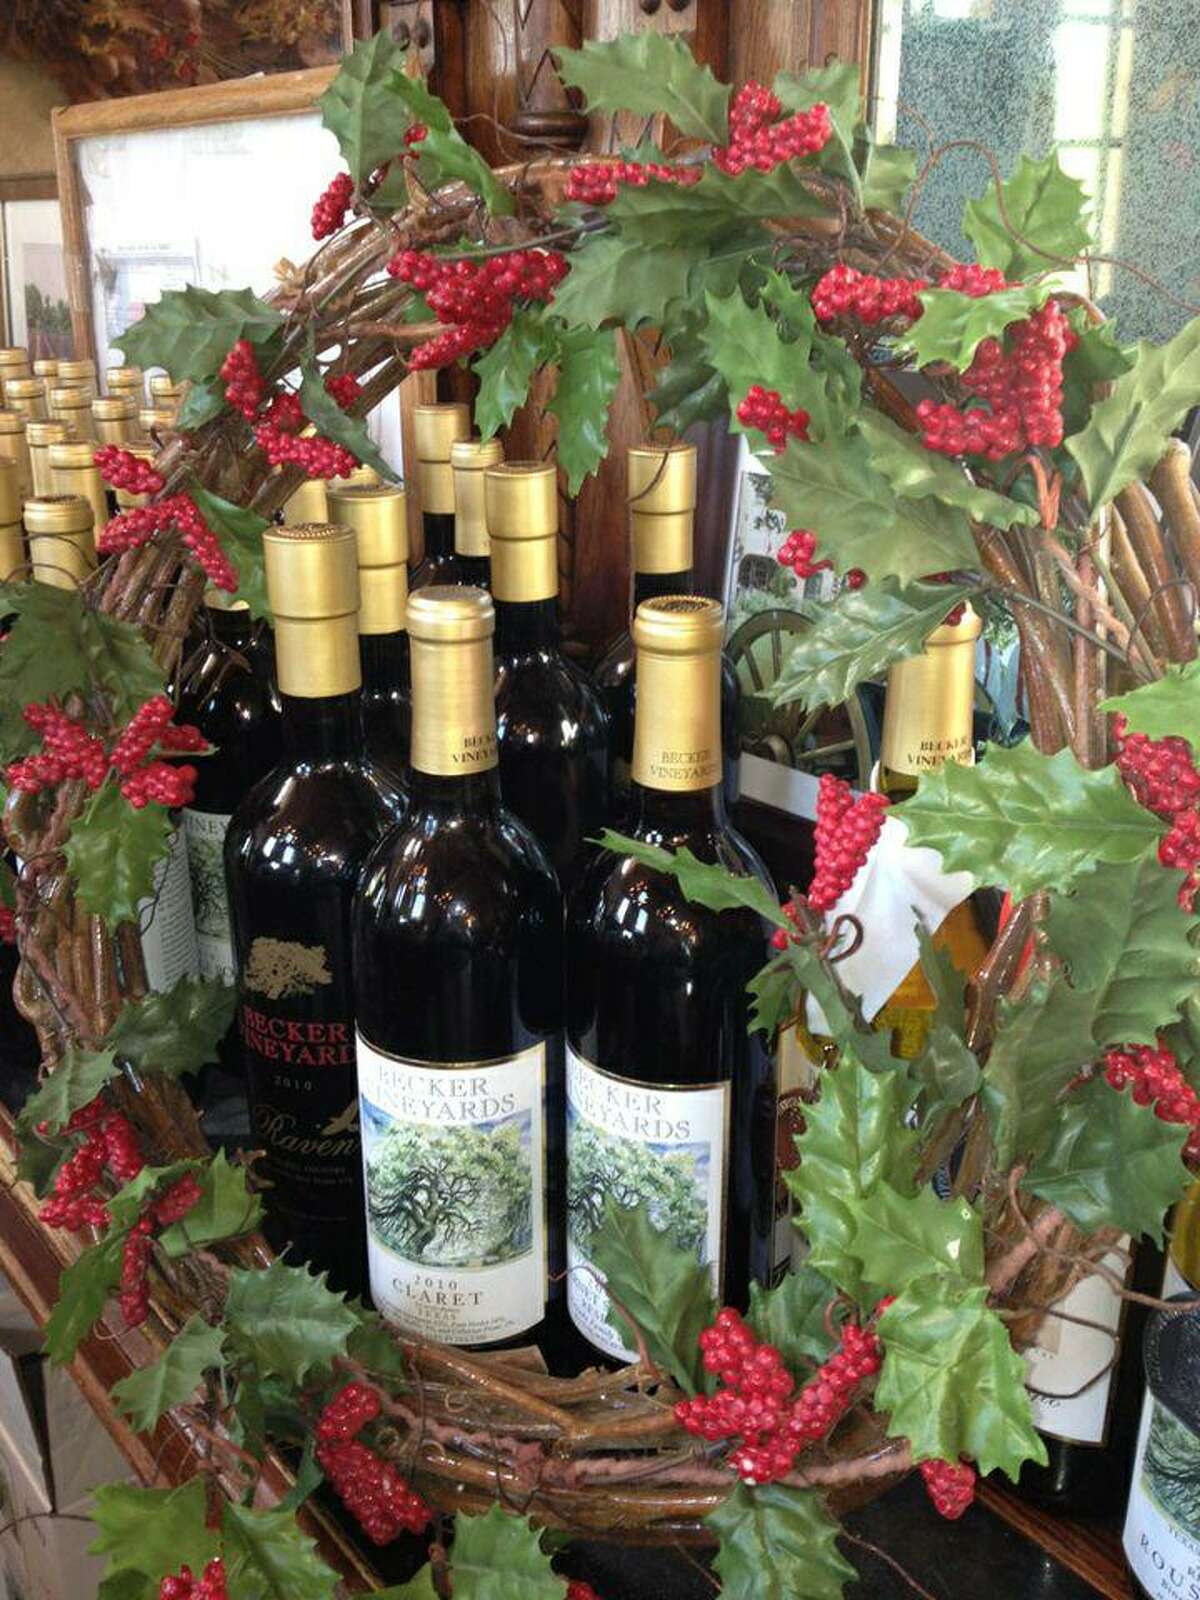 Becker Vineyards wines are displayed with a holiday wreath.